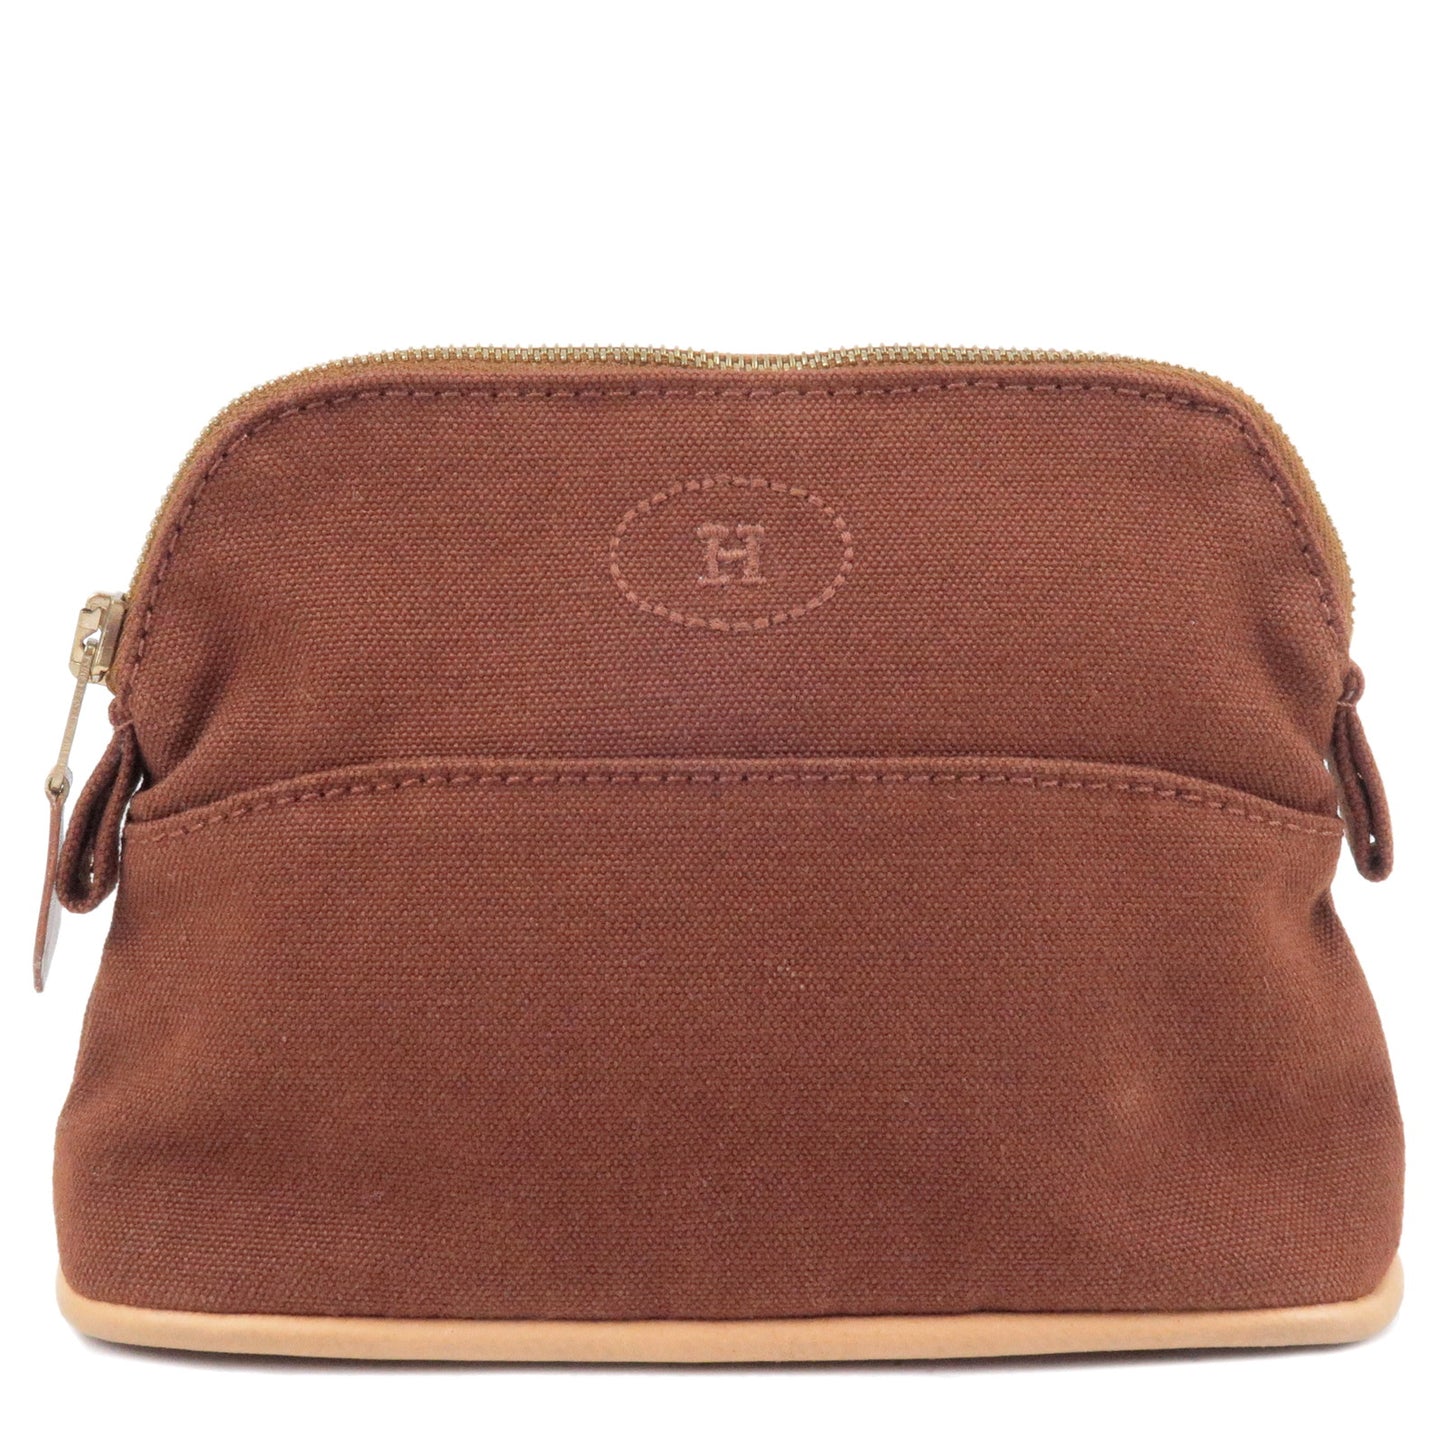 HERMES-Canvas-Leather-Bolide-Pouch-Mini-Brown